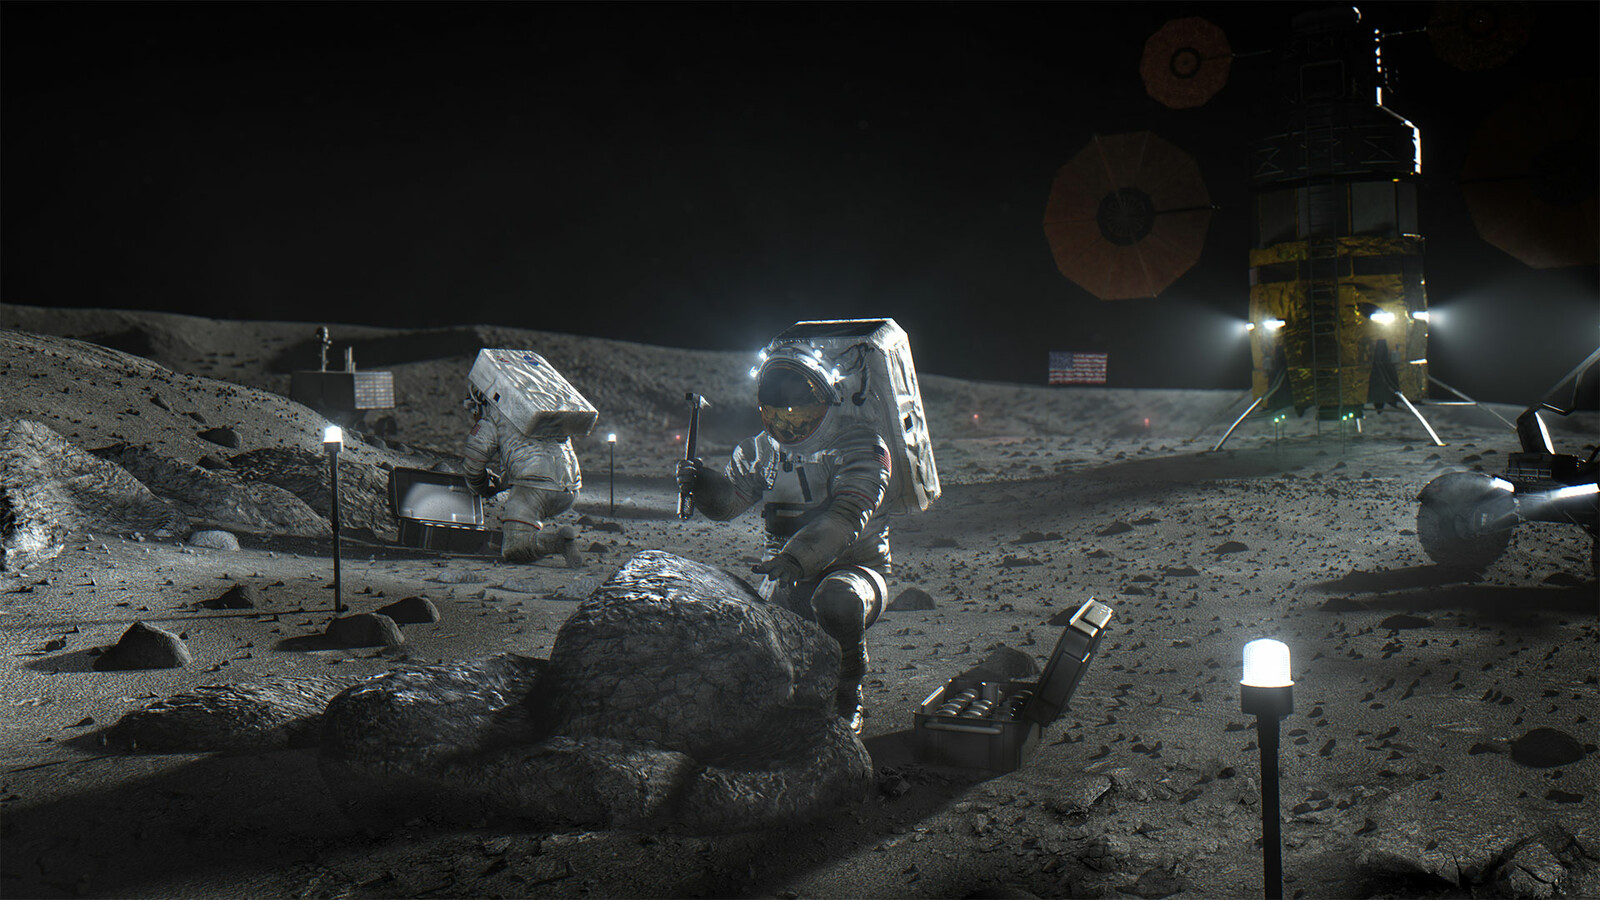 Concept image of Astronauts at a Lunar Homestead